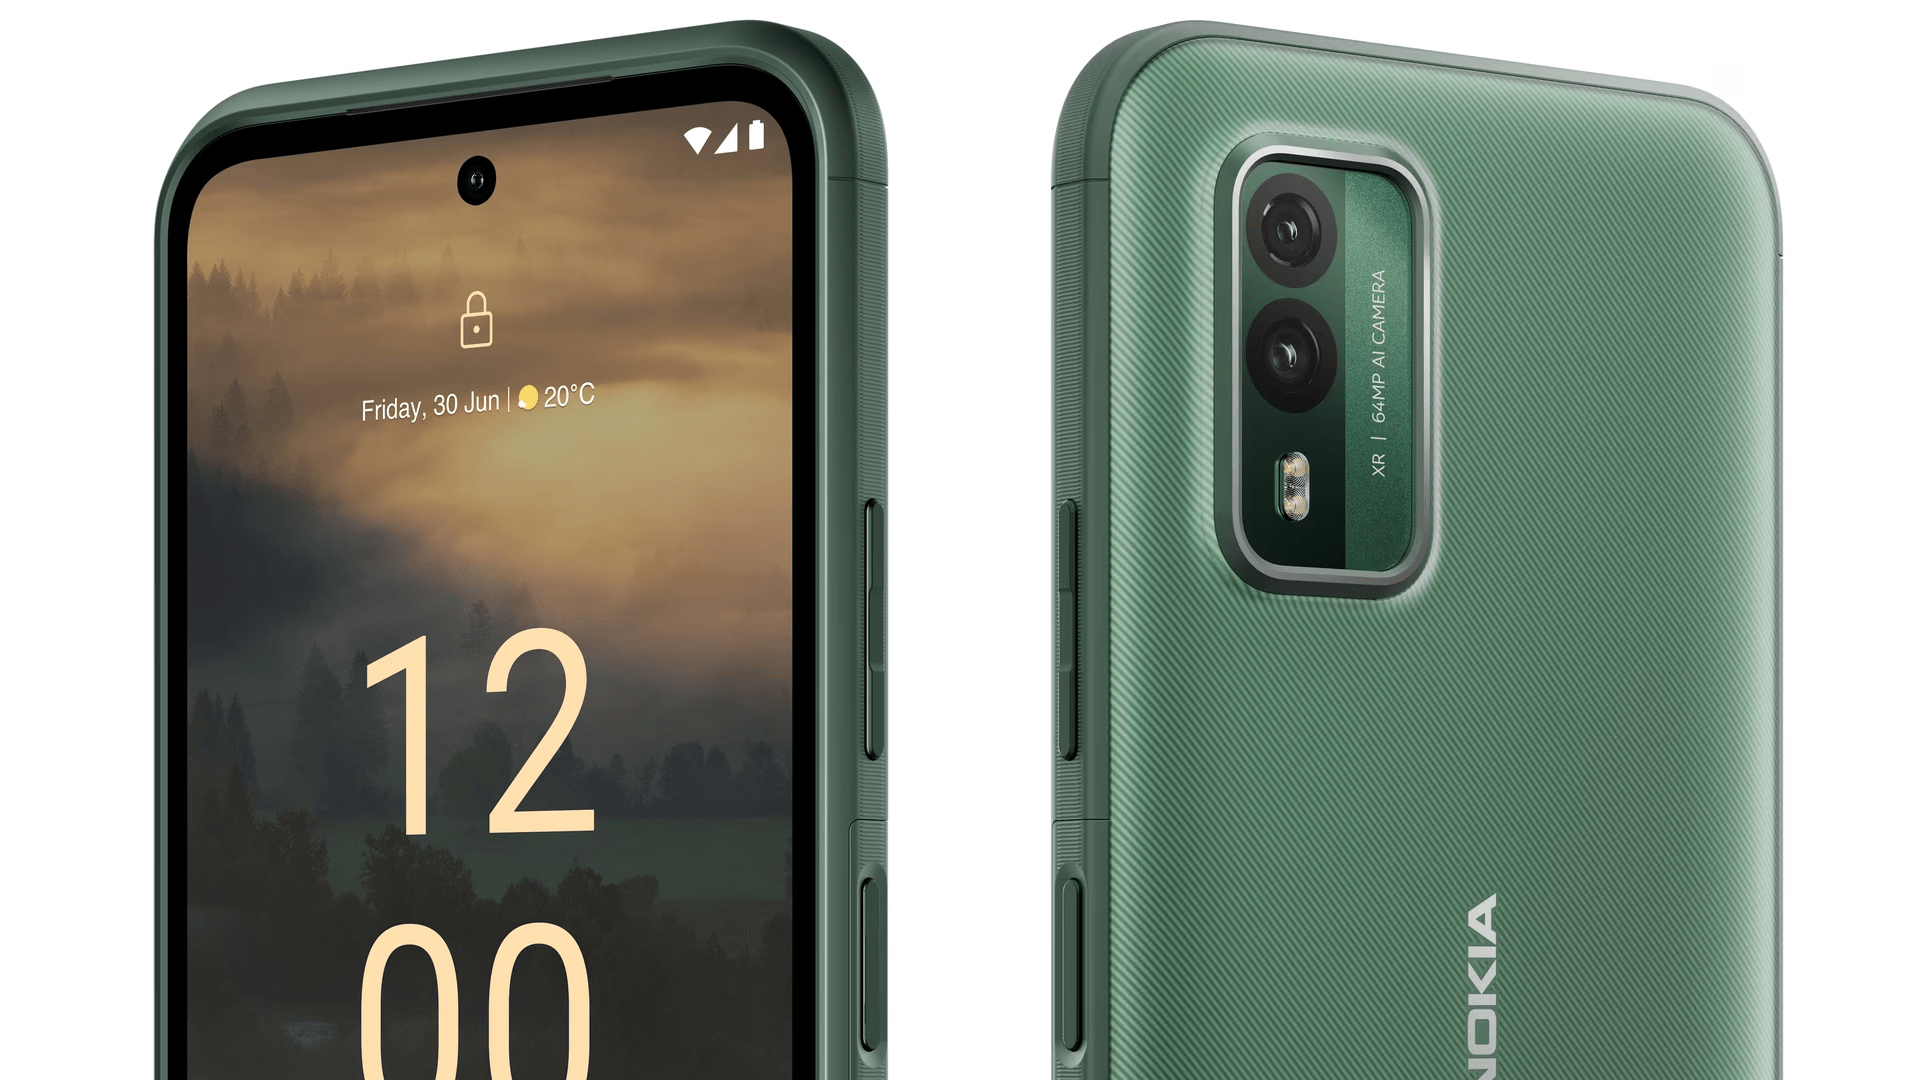 Nokia XR21 5G: That's the name of HMD Global's new rugged smartphone with a 120Hz screen and Snapdragon 695 chip